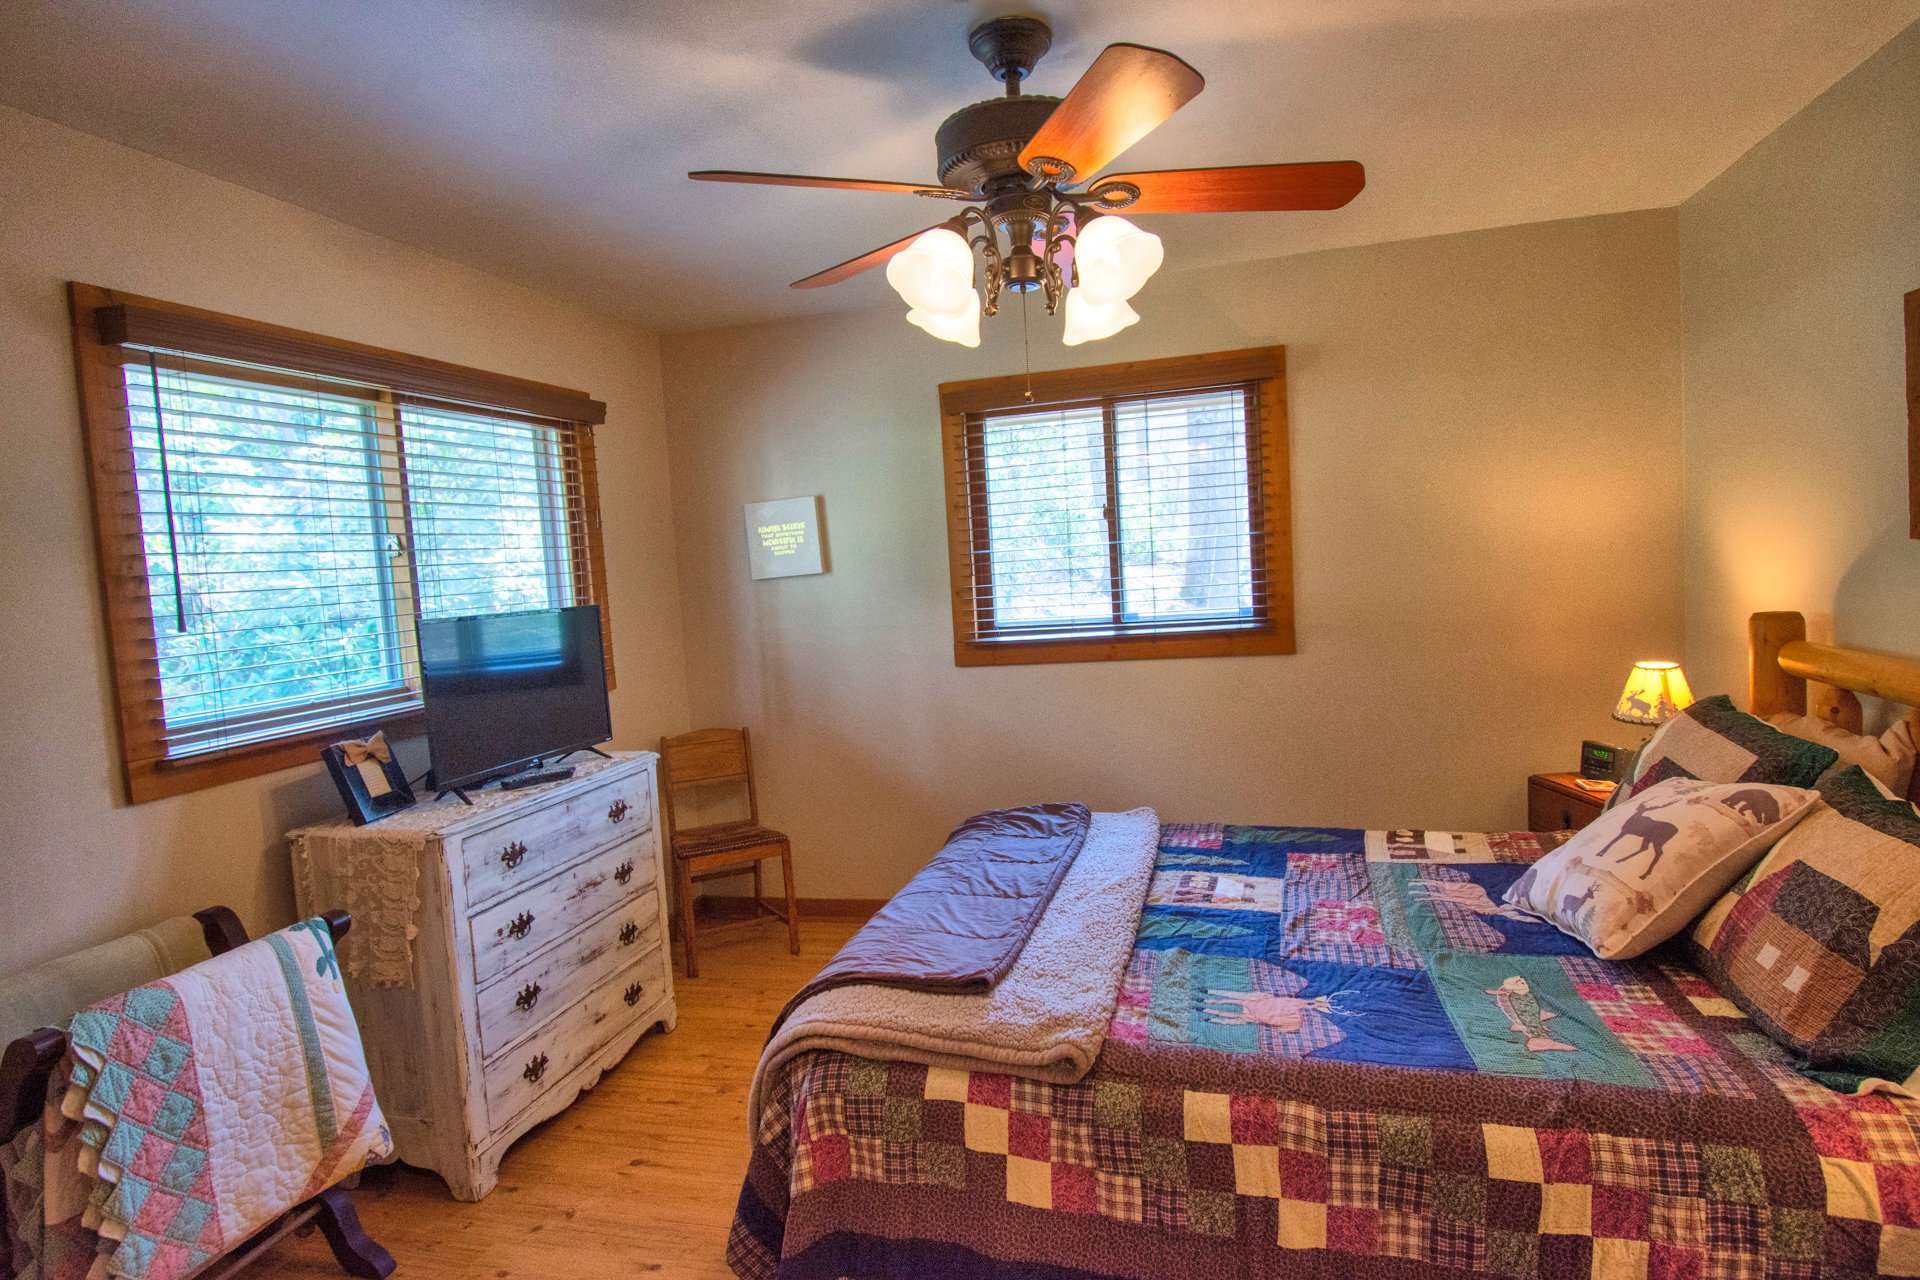 The bedroom is both spacious and cozy with lots of windows for natural light.